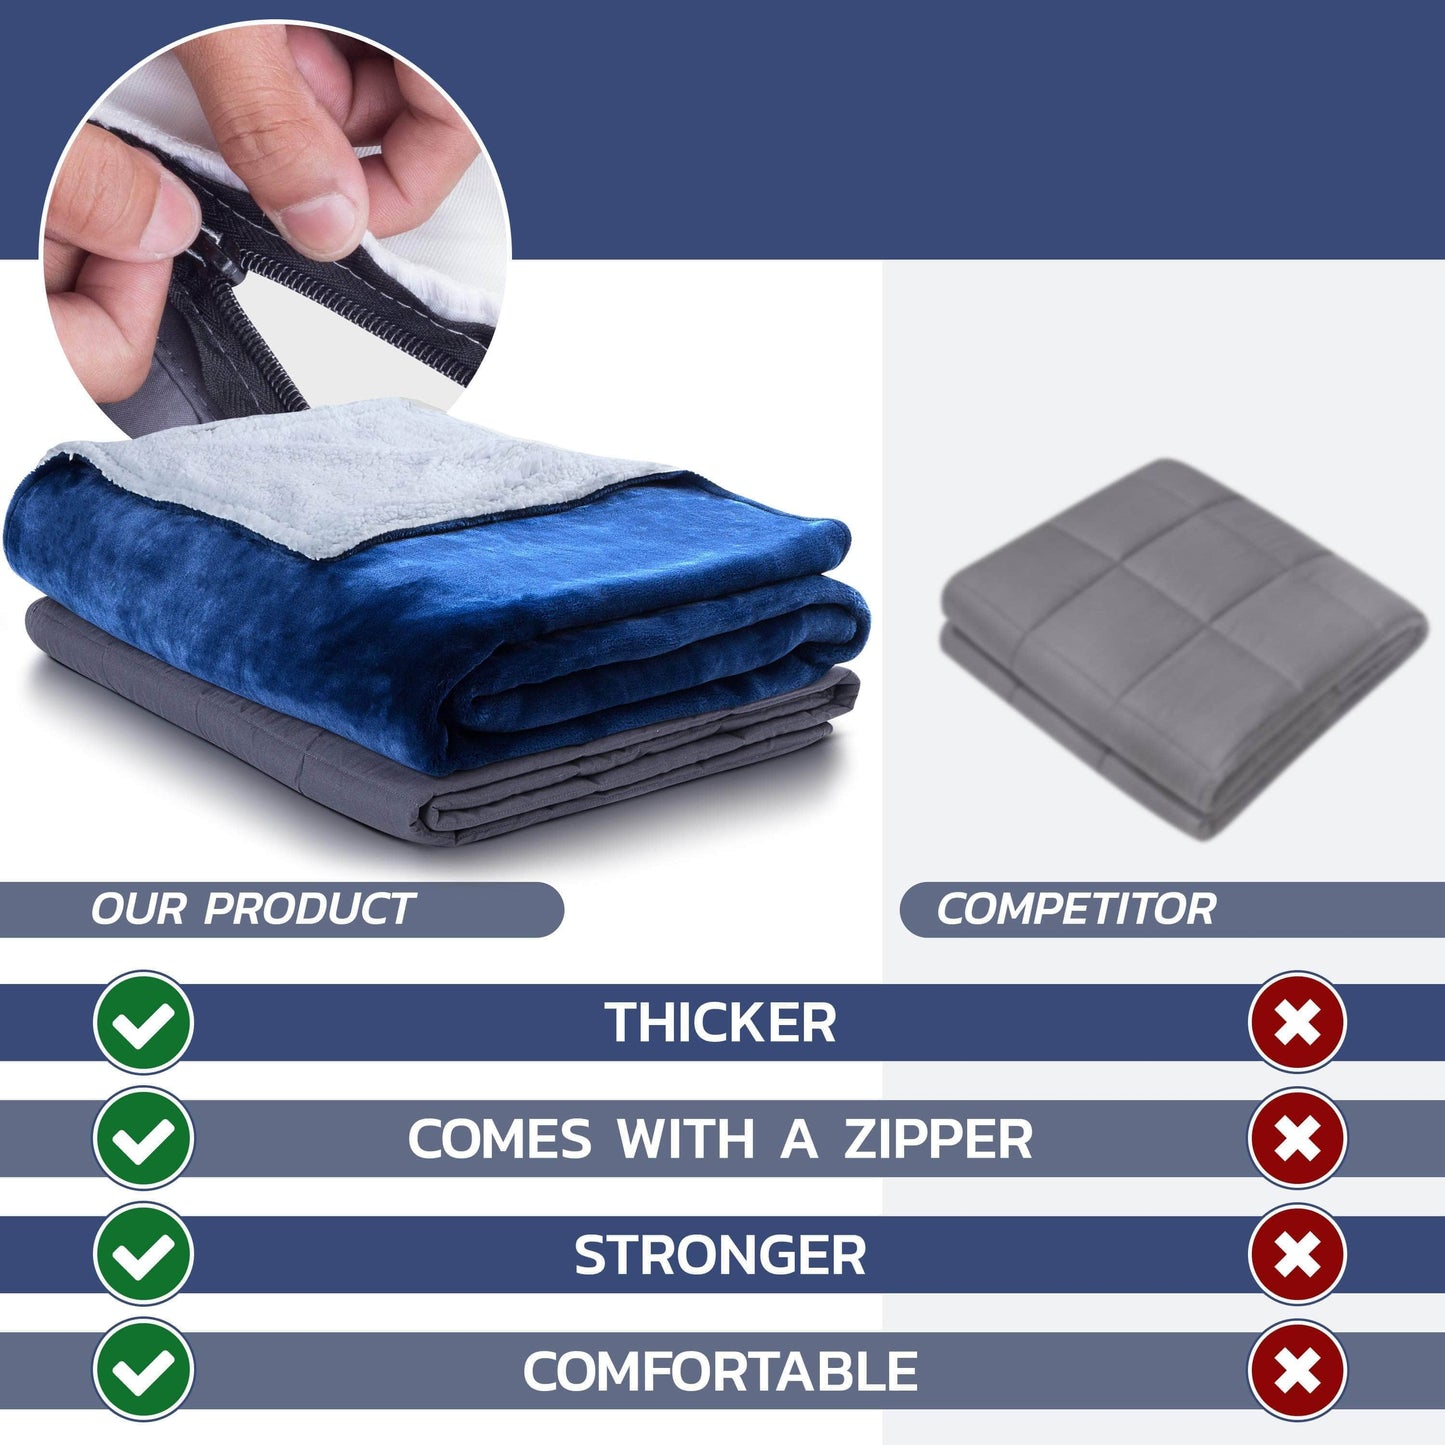 Hush Blankets Blanket Hush 8lb Weighted Throw Sherpa Fleece Blanket - Available in 2 Colours